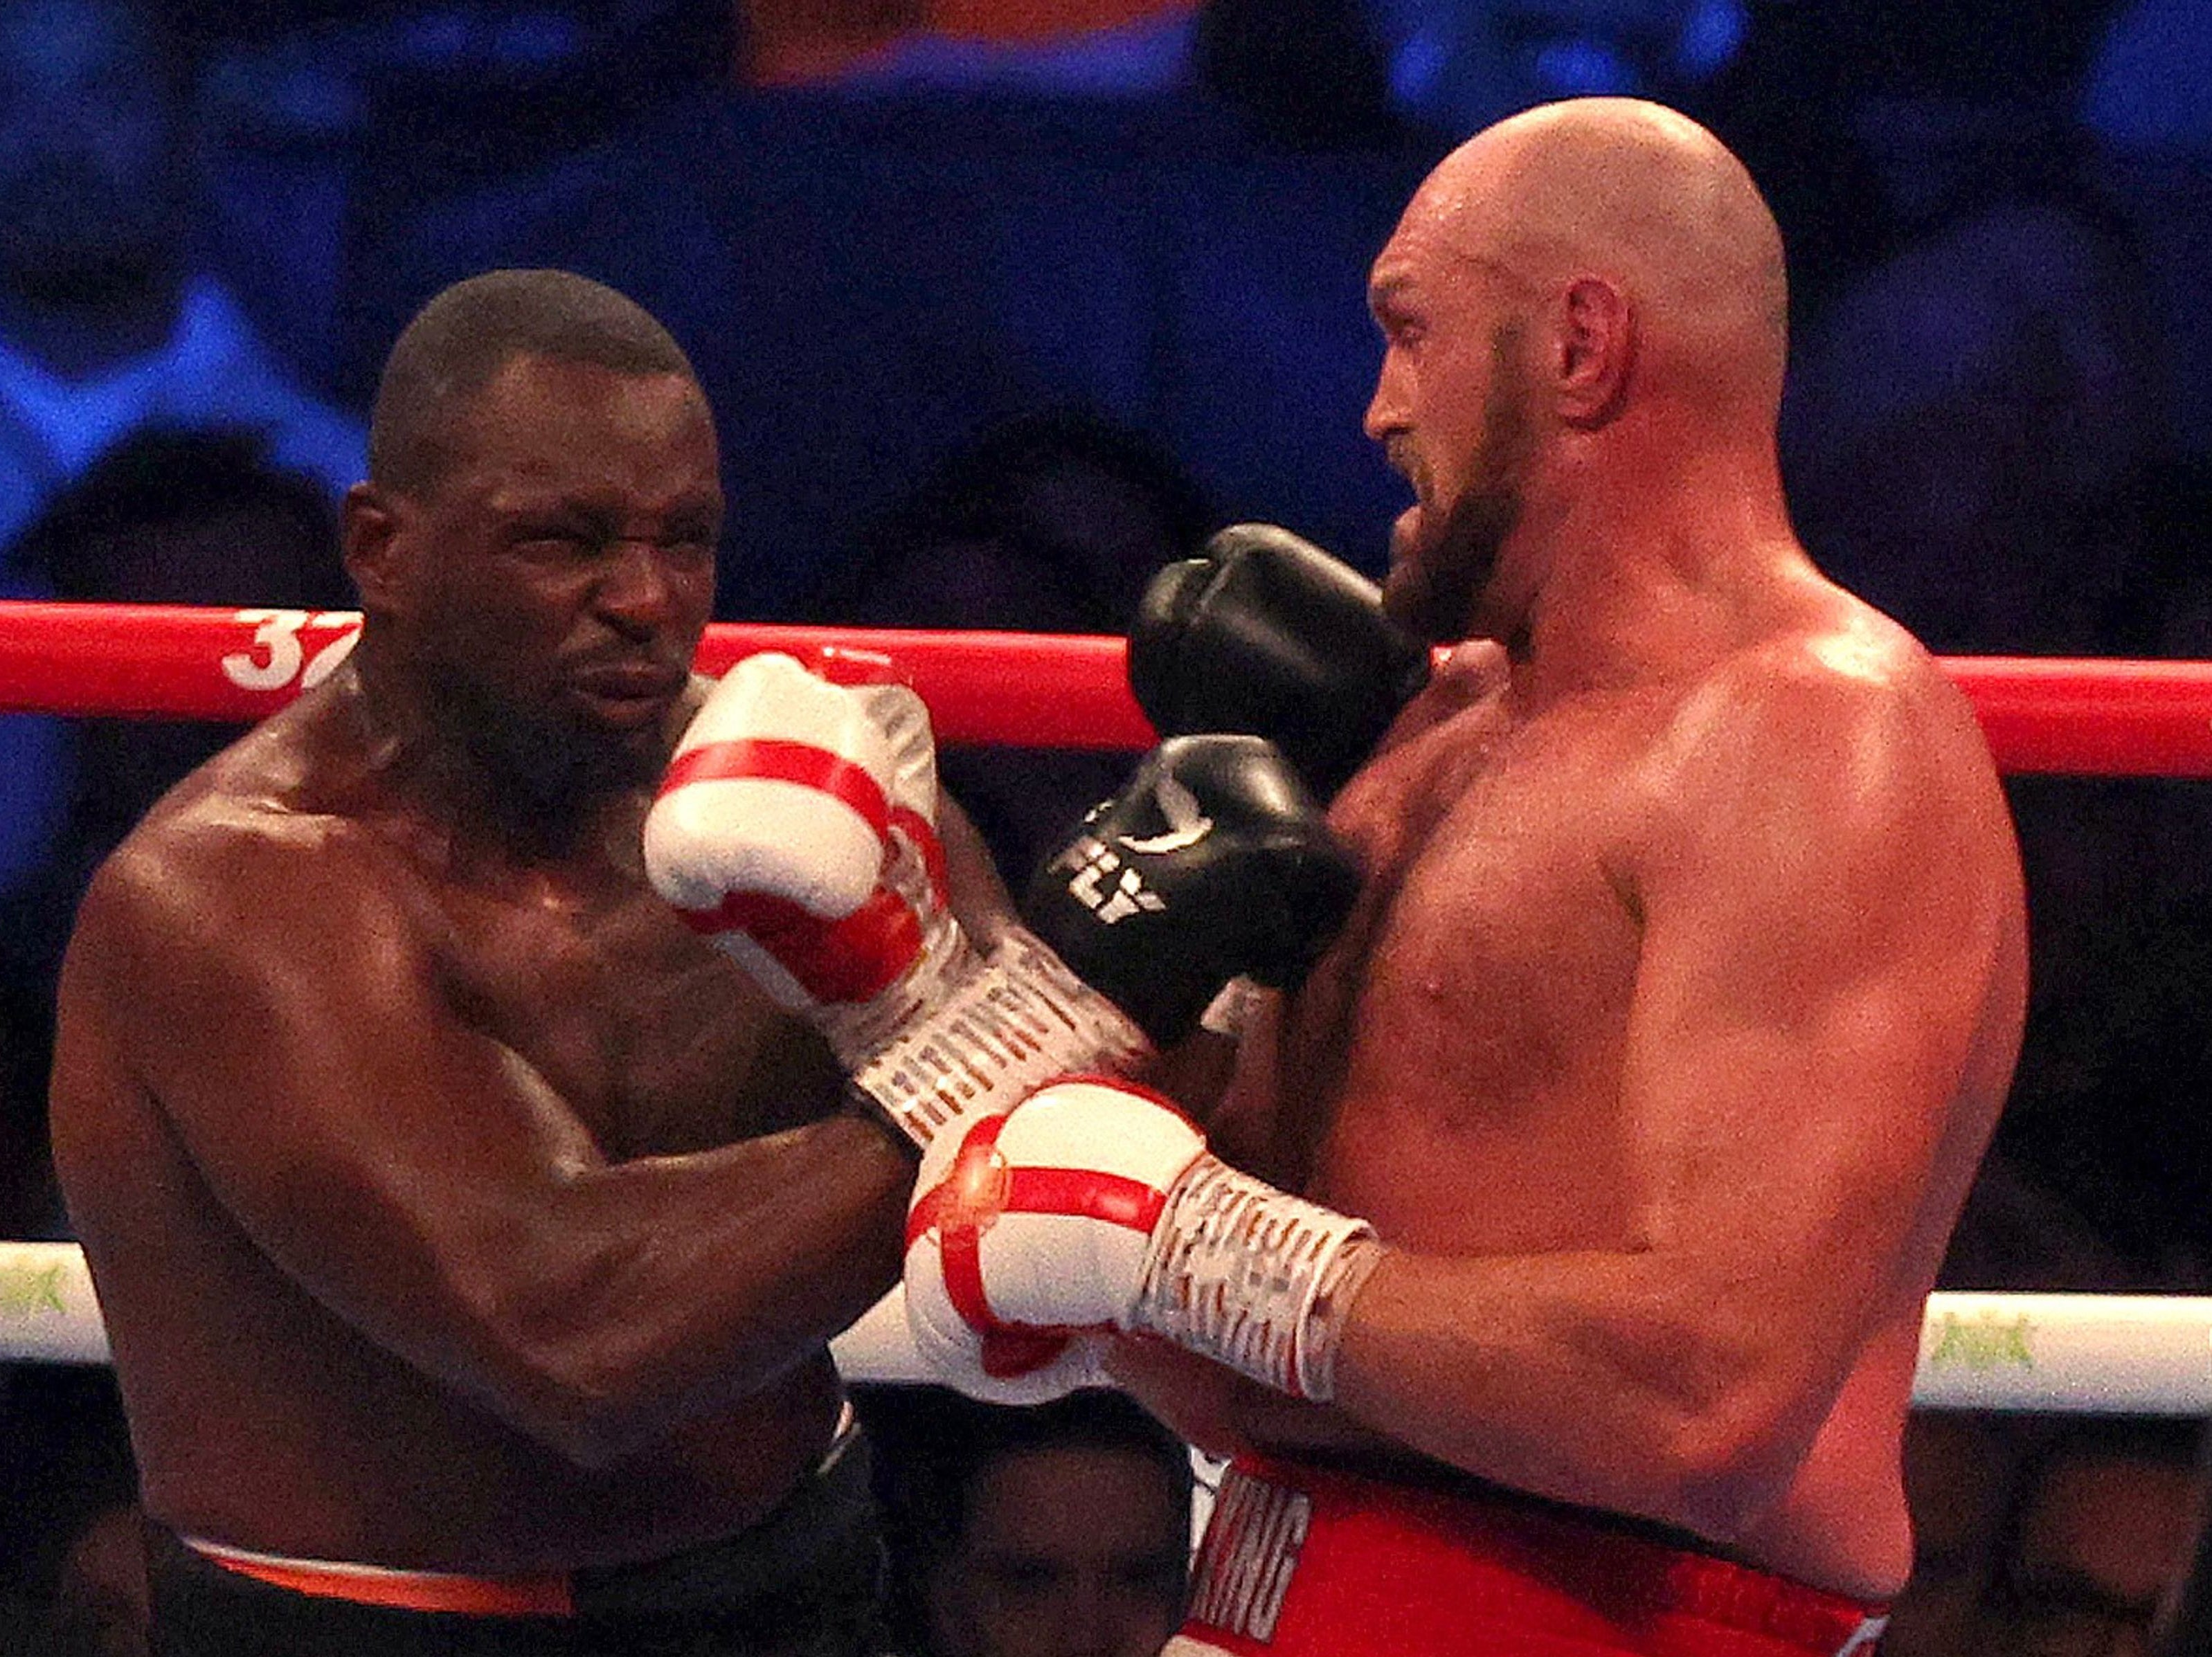 Fury stopped Whyte with an uppercut with one second left in Round 6